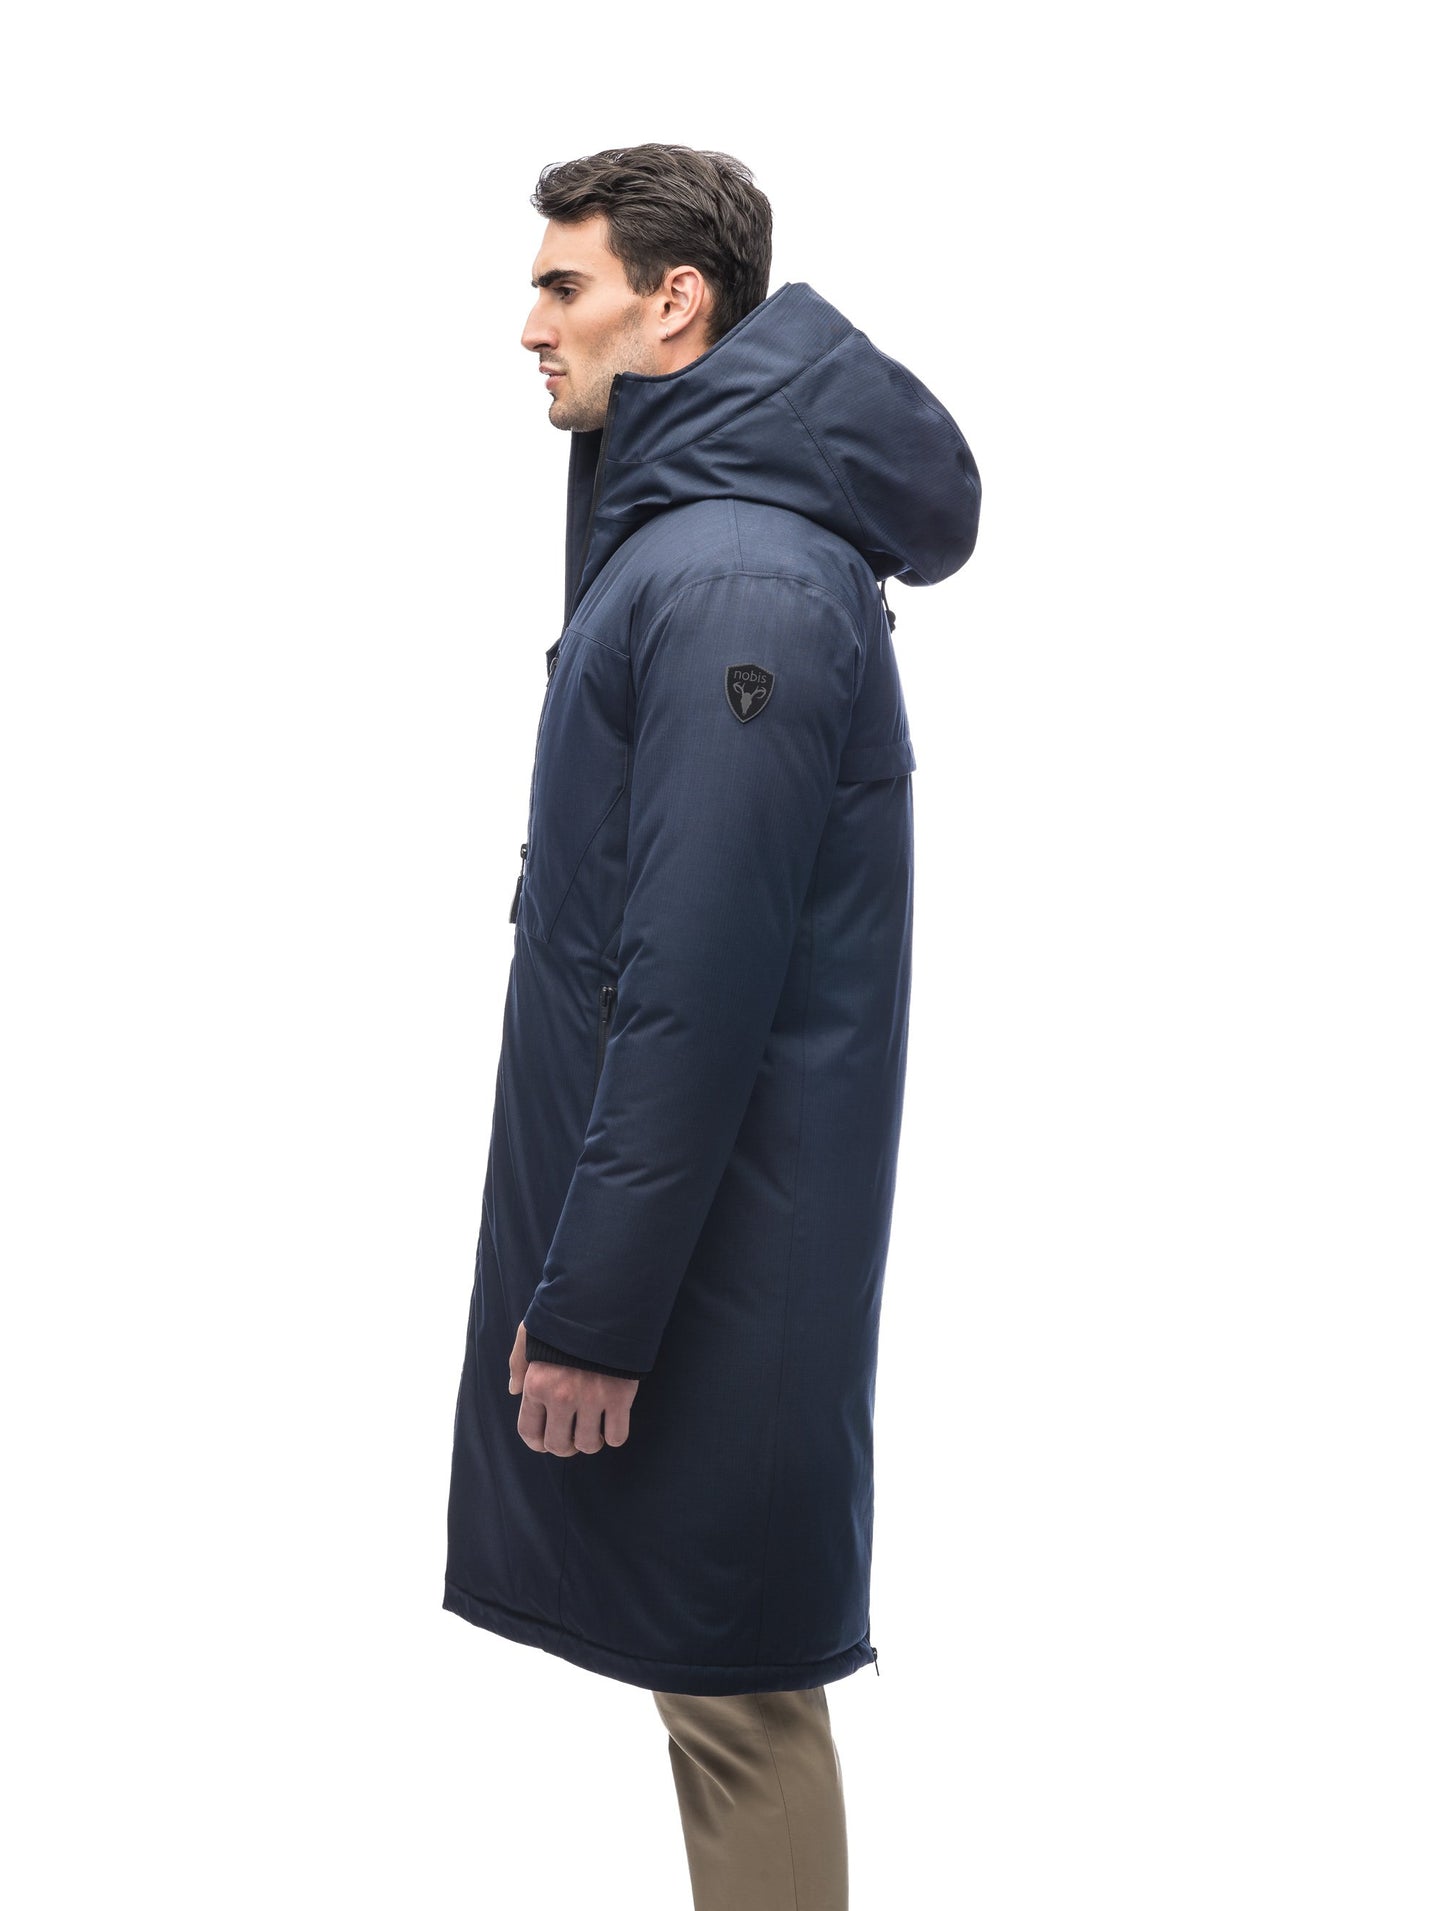 Long men's calf length parka with down fill and exposed zipper that features spacious pockets and zippered vents in Navy